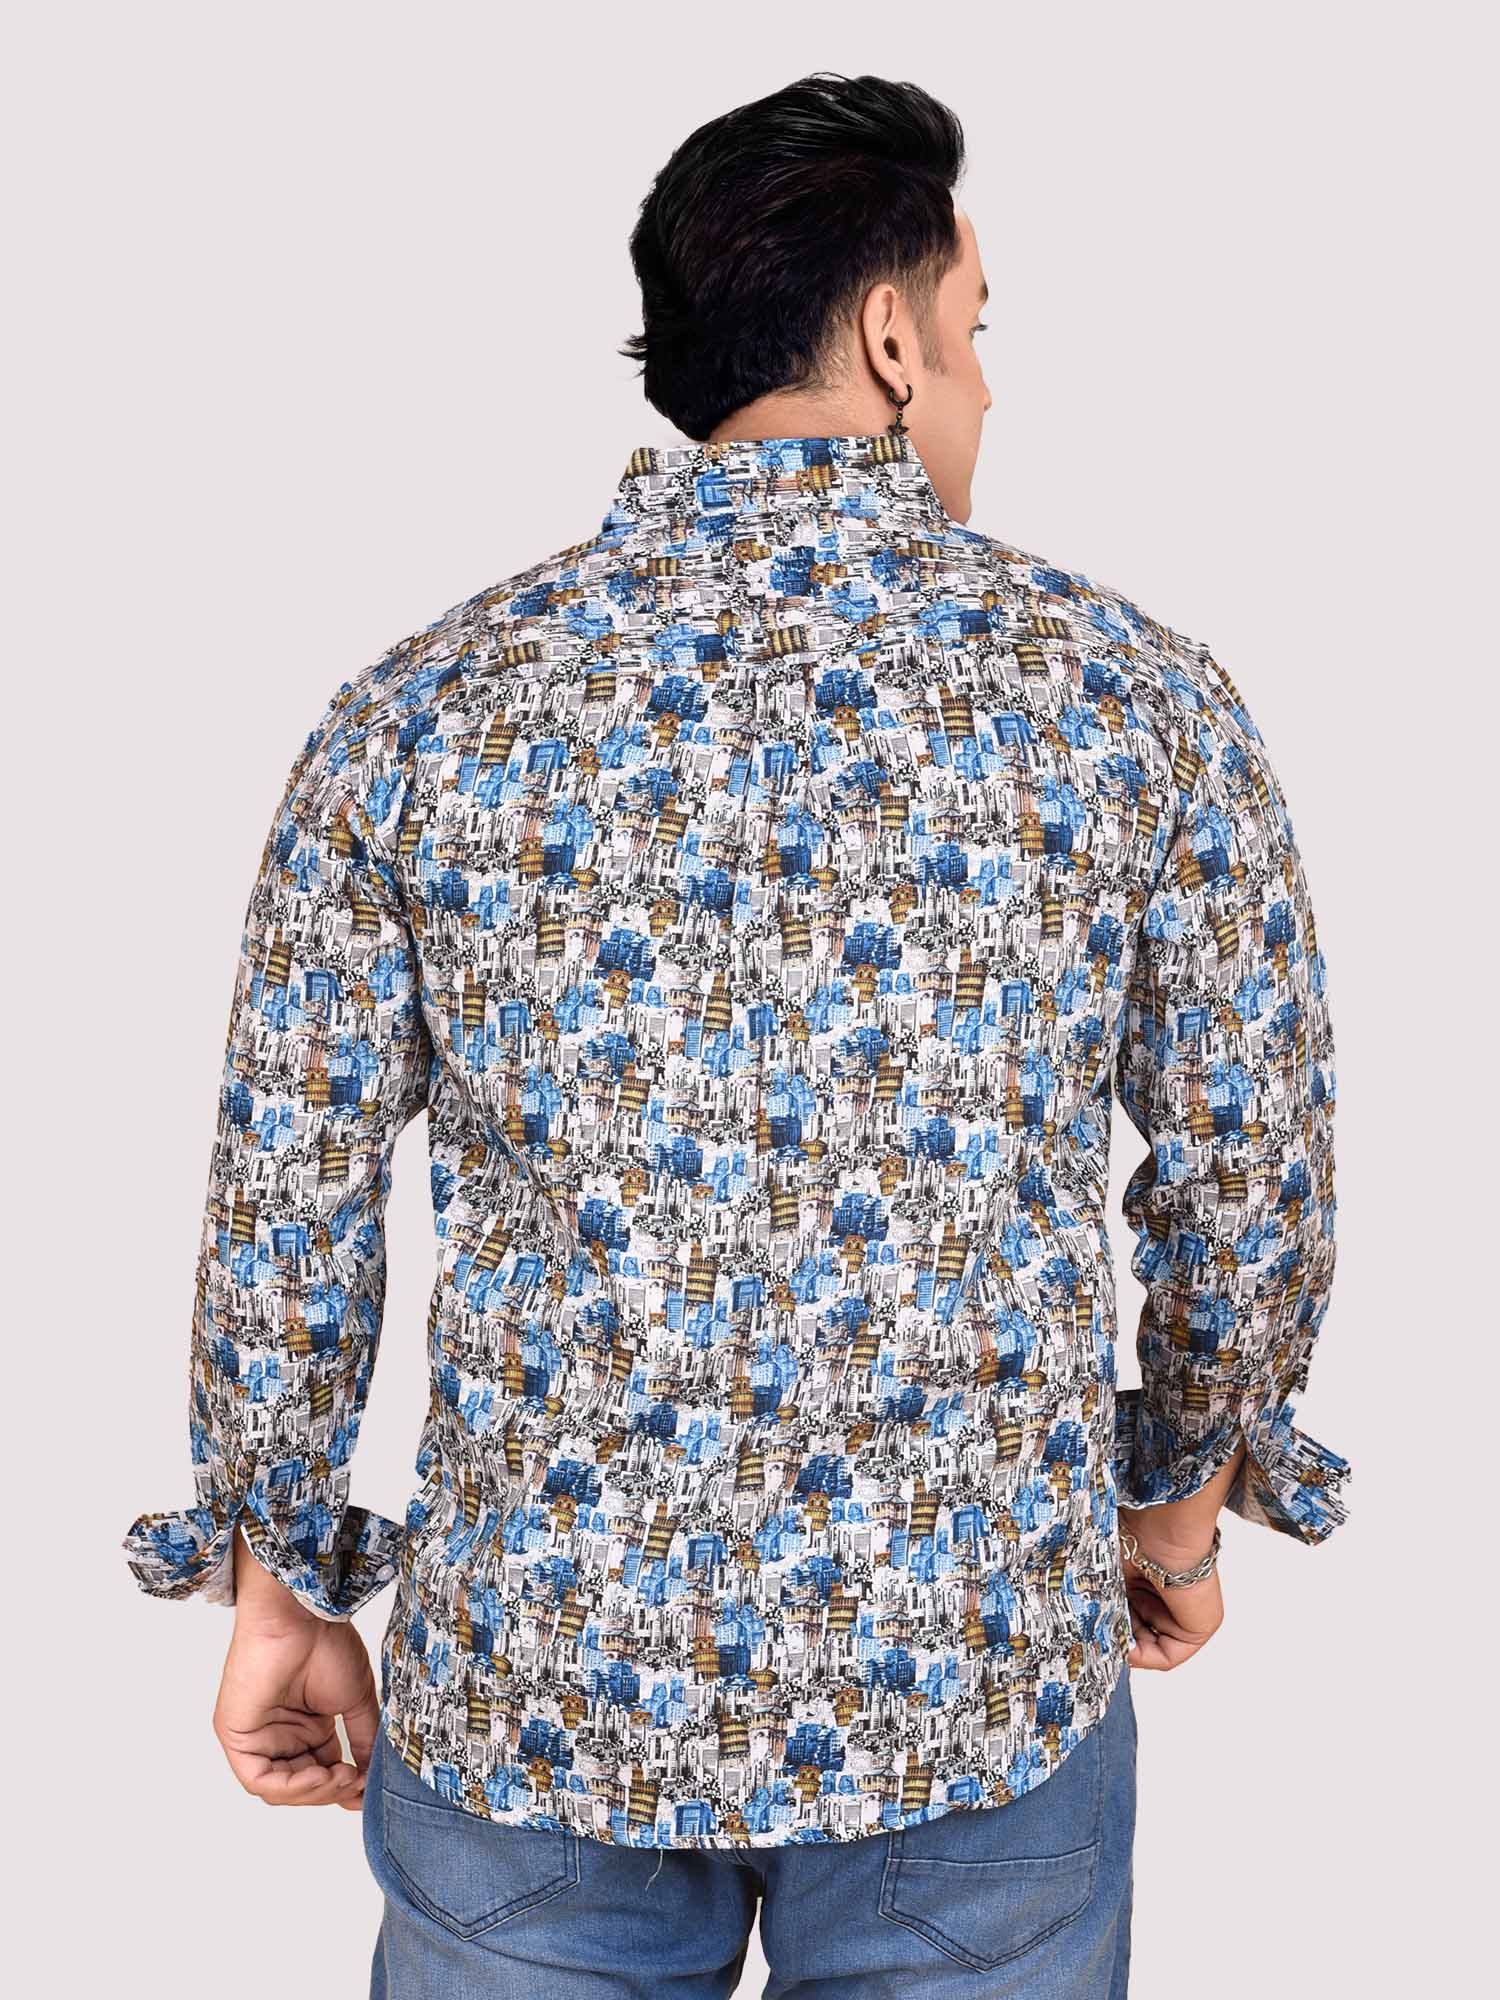 Abstract Printed Cotton Full sleeve Men's Plus size